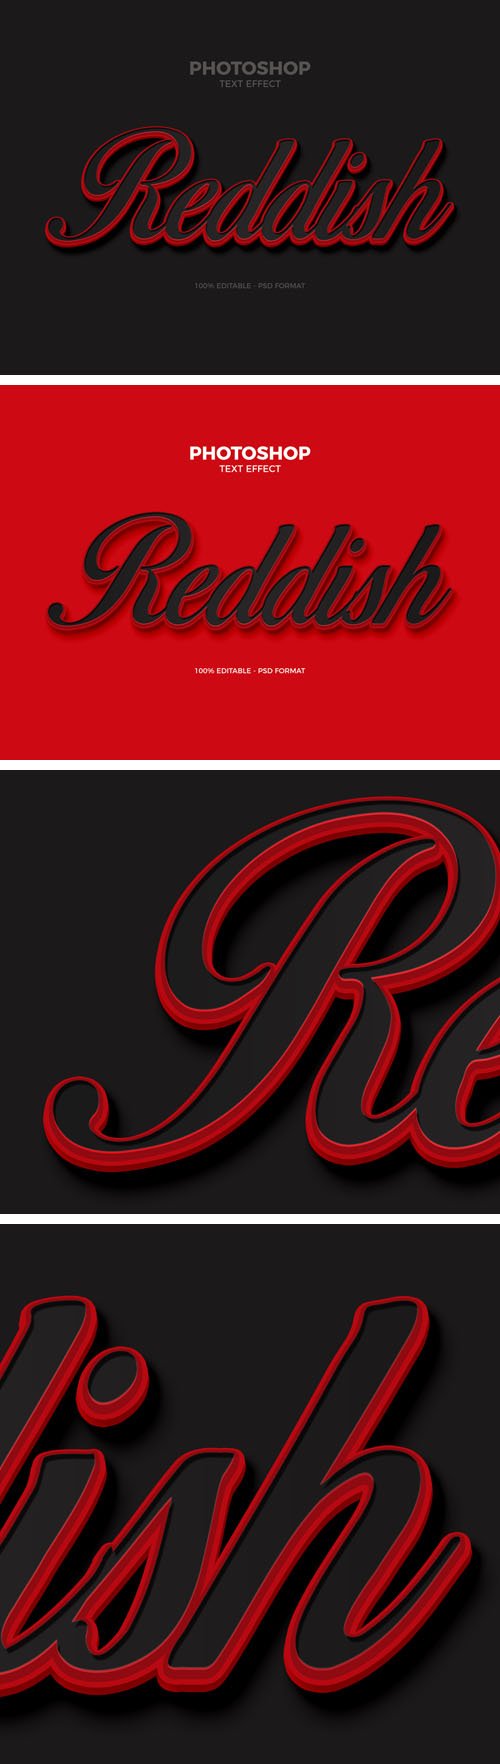 Reddish Text Effect for Photoshop